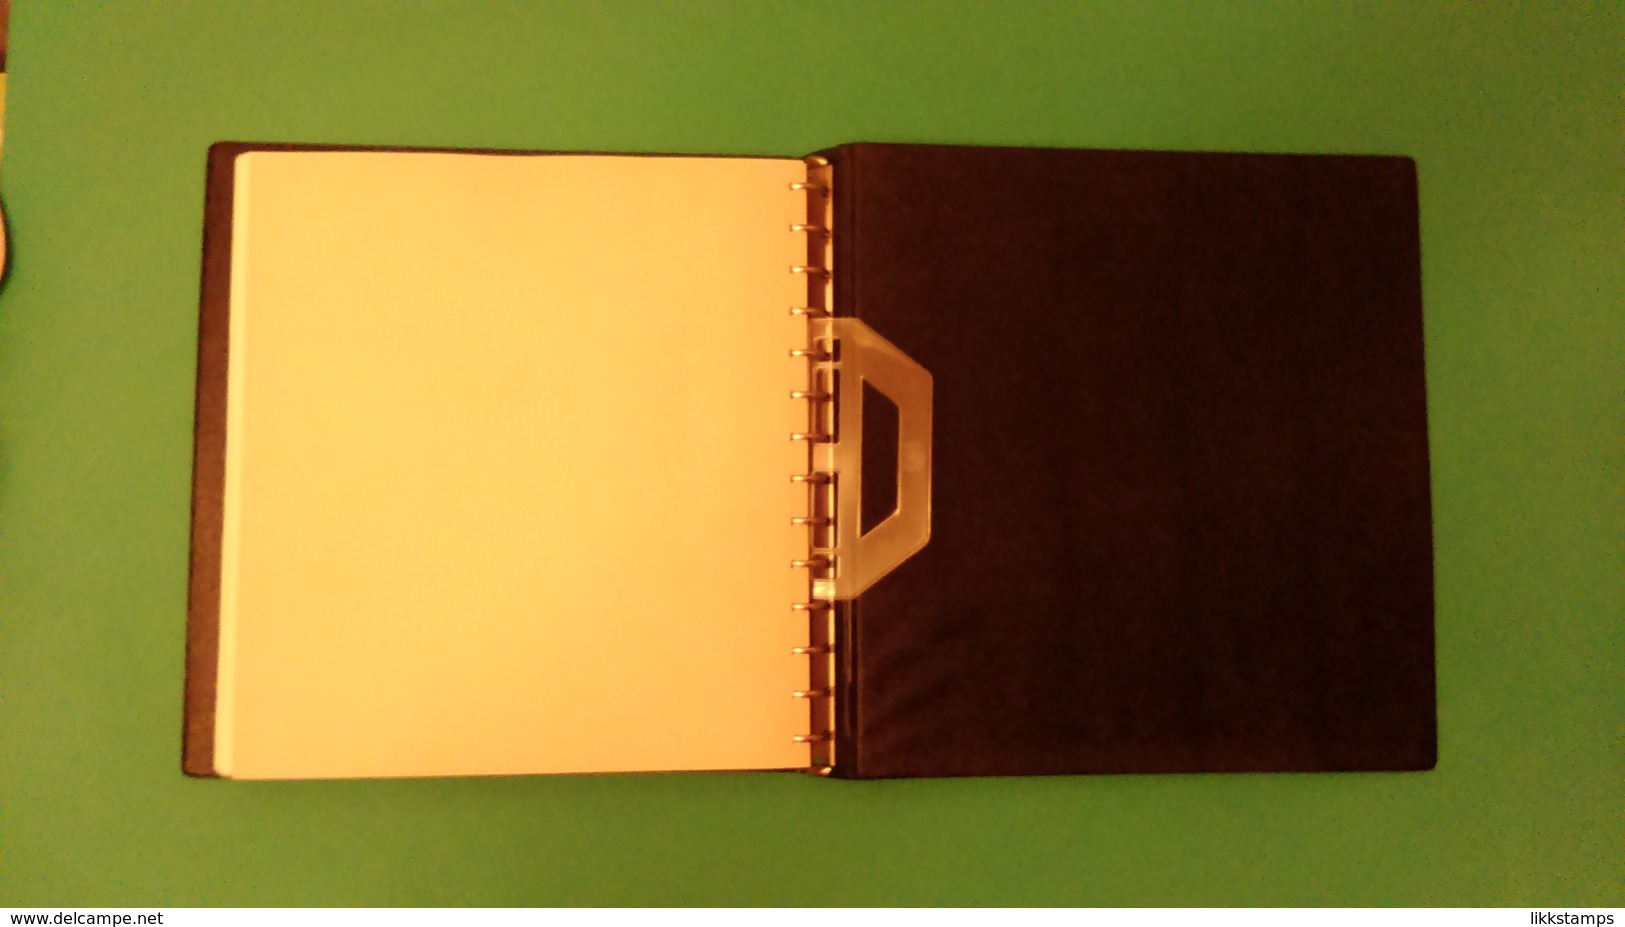 SAFE 14 RING BINDER WITH HINGLESS PAGES FOR EAST GERMANY (D.D.R.) 1969-76 #A00008 (B6)